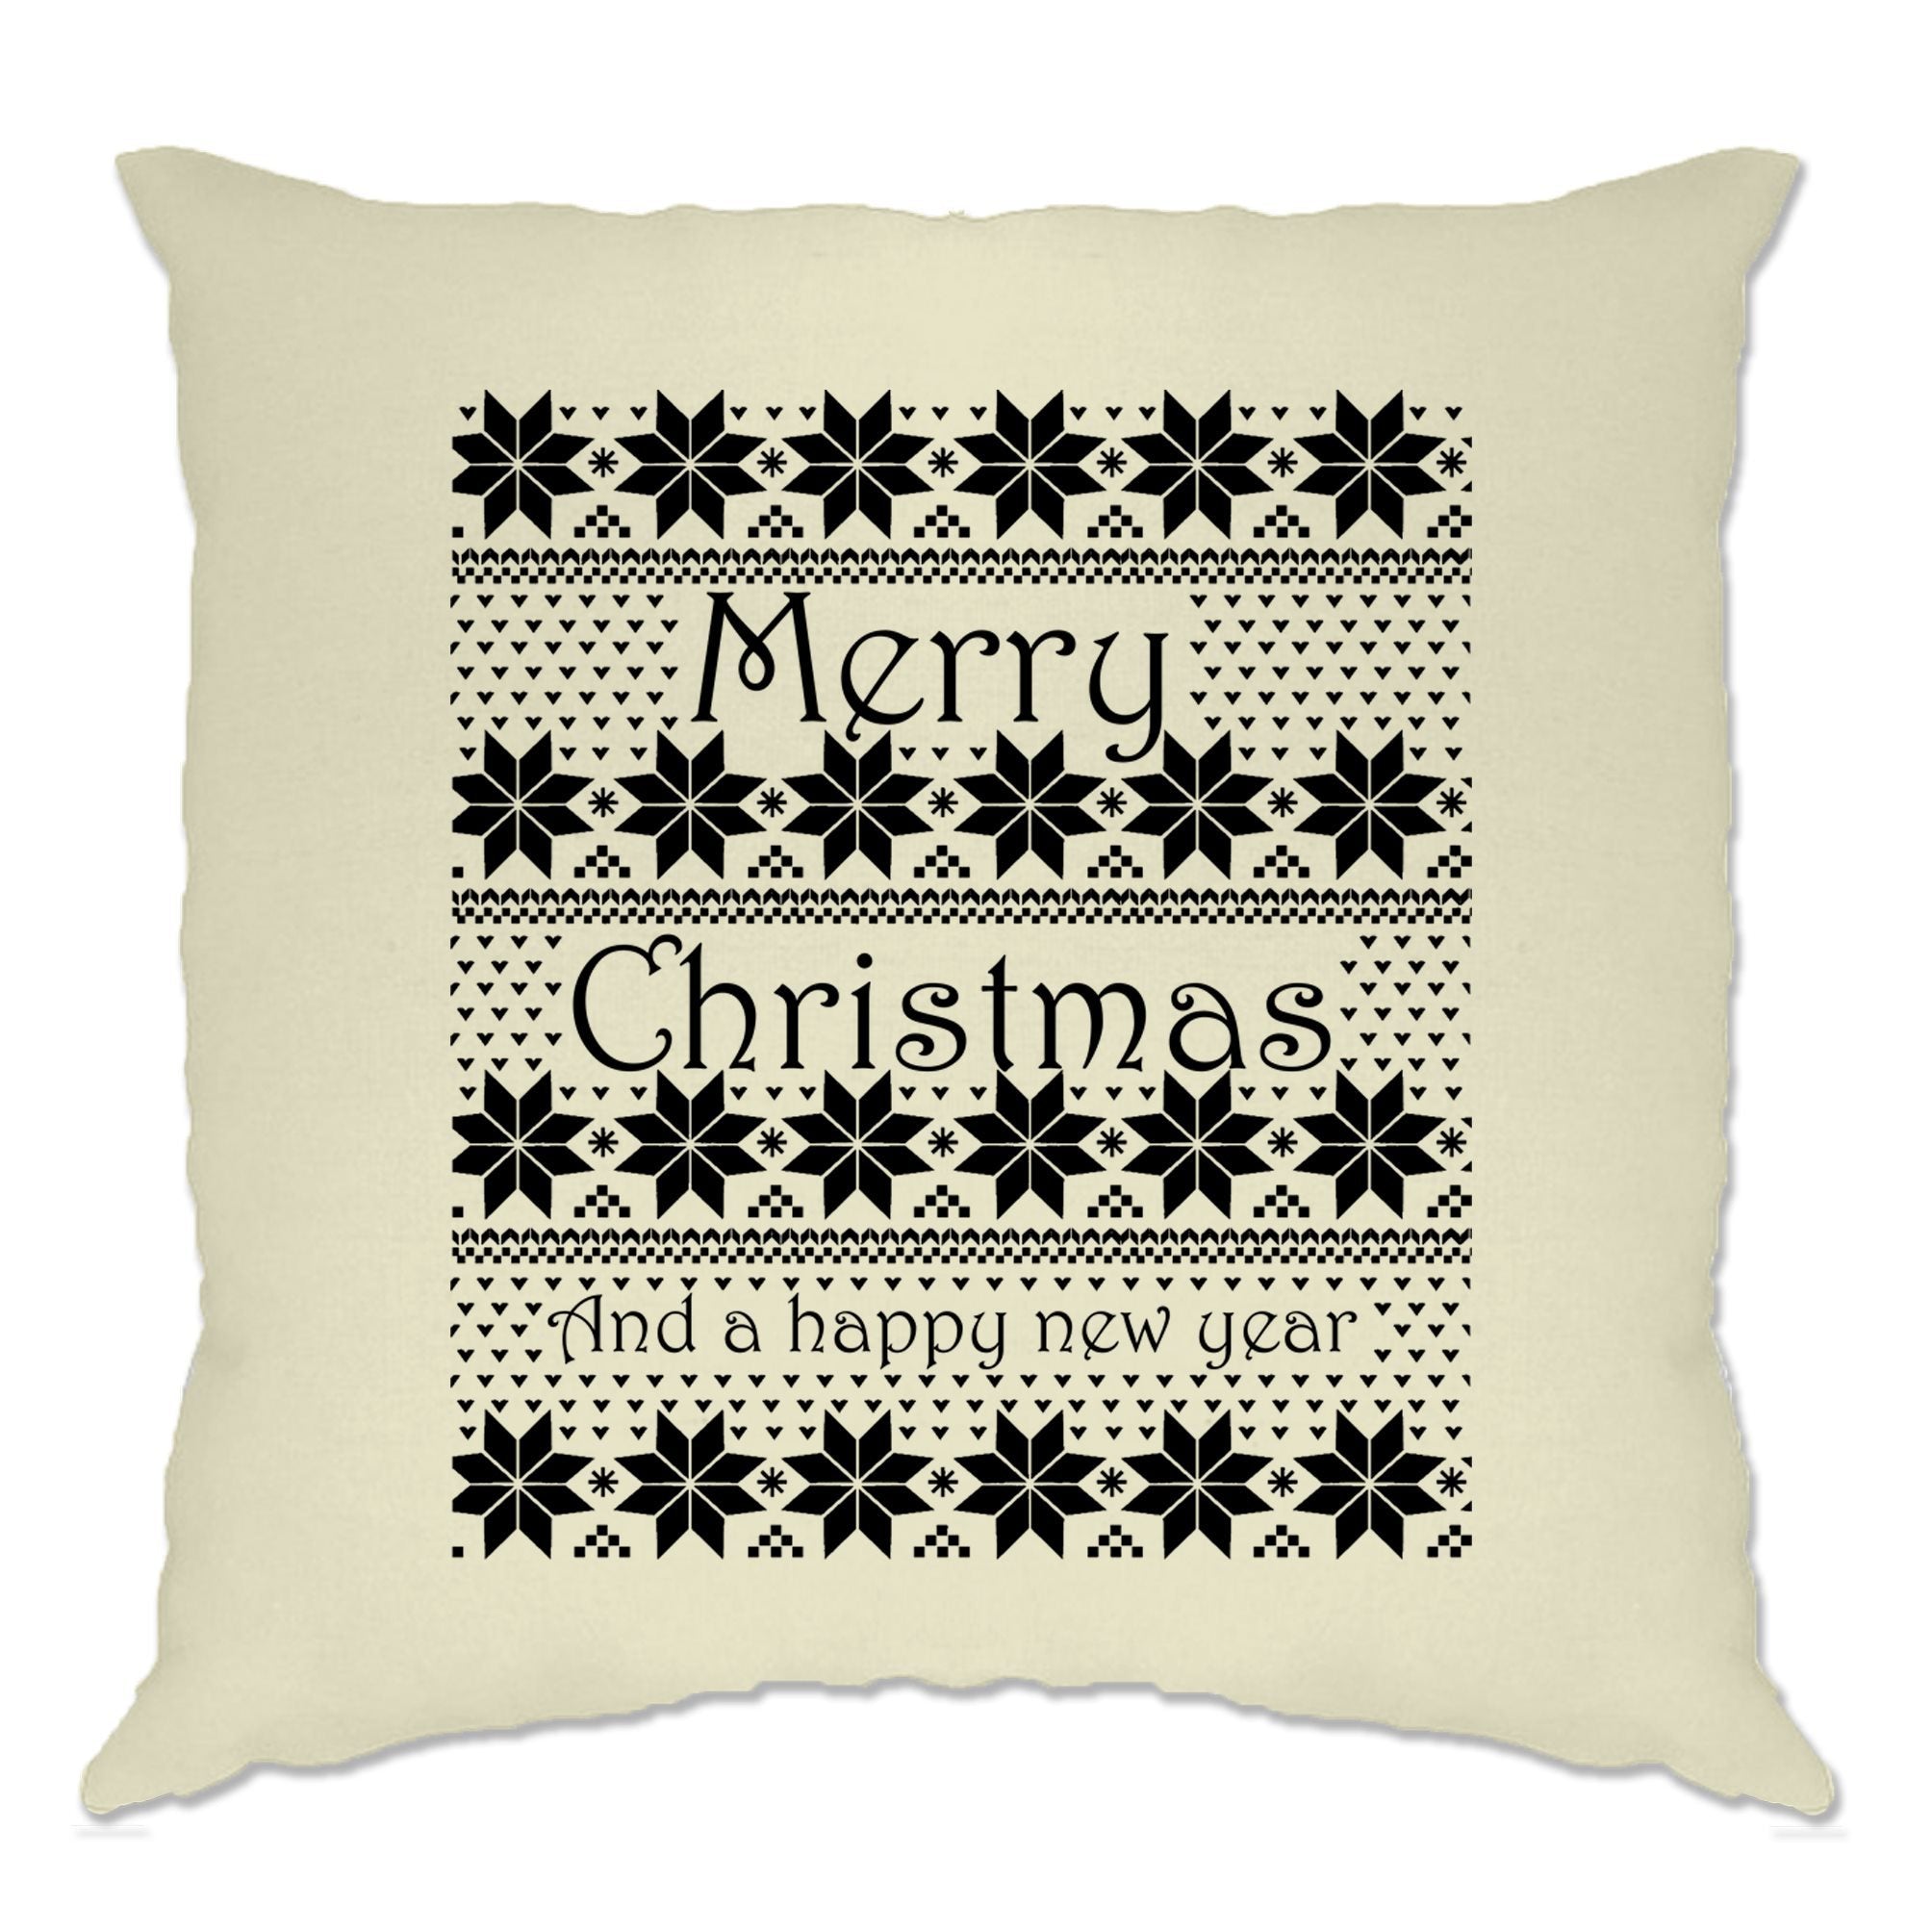 Merry Christmas Cushion Cover Xmas Ugly Sweater Pattern